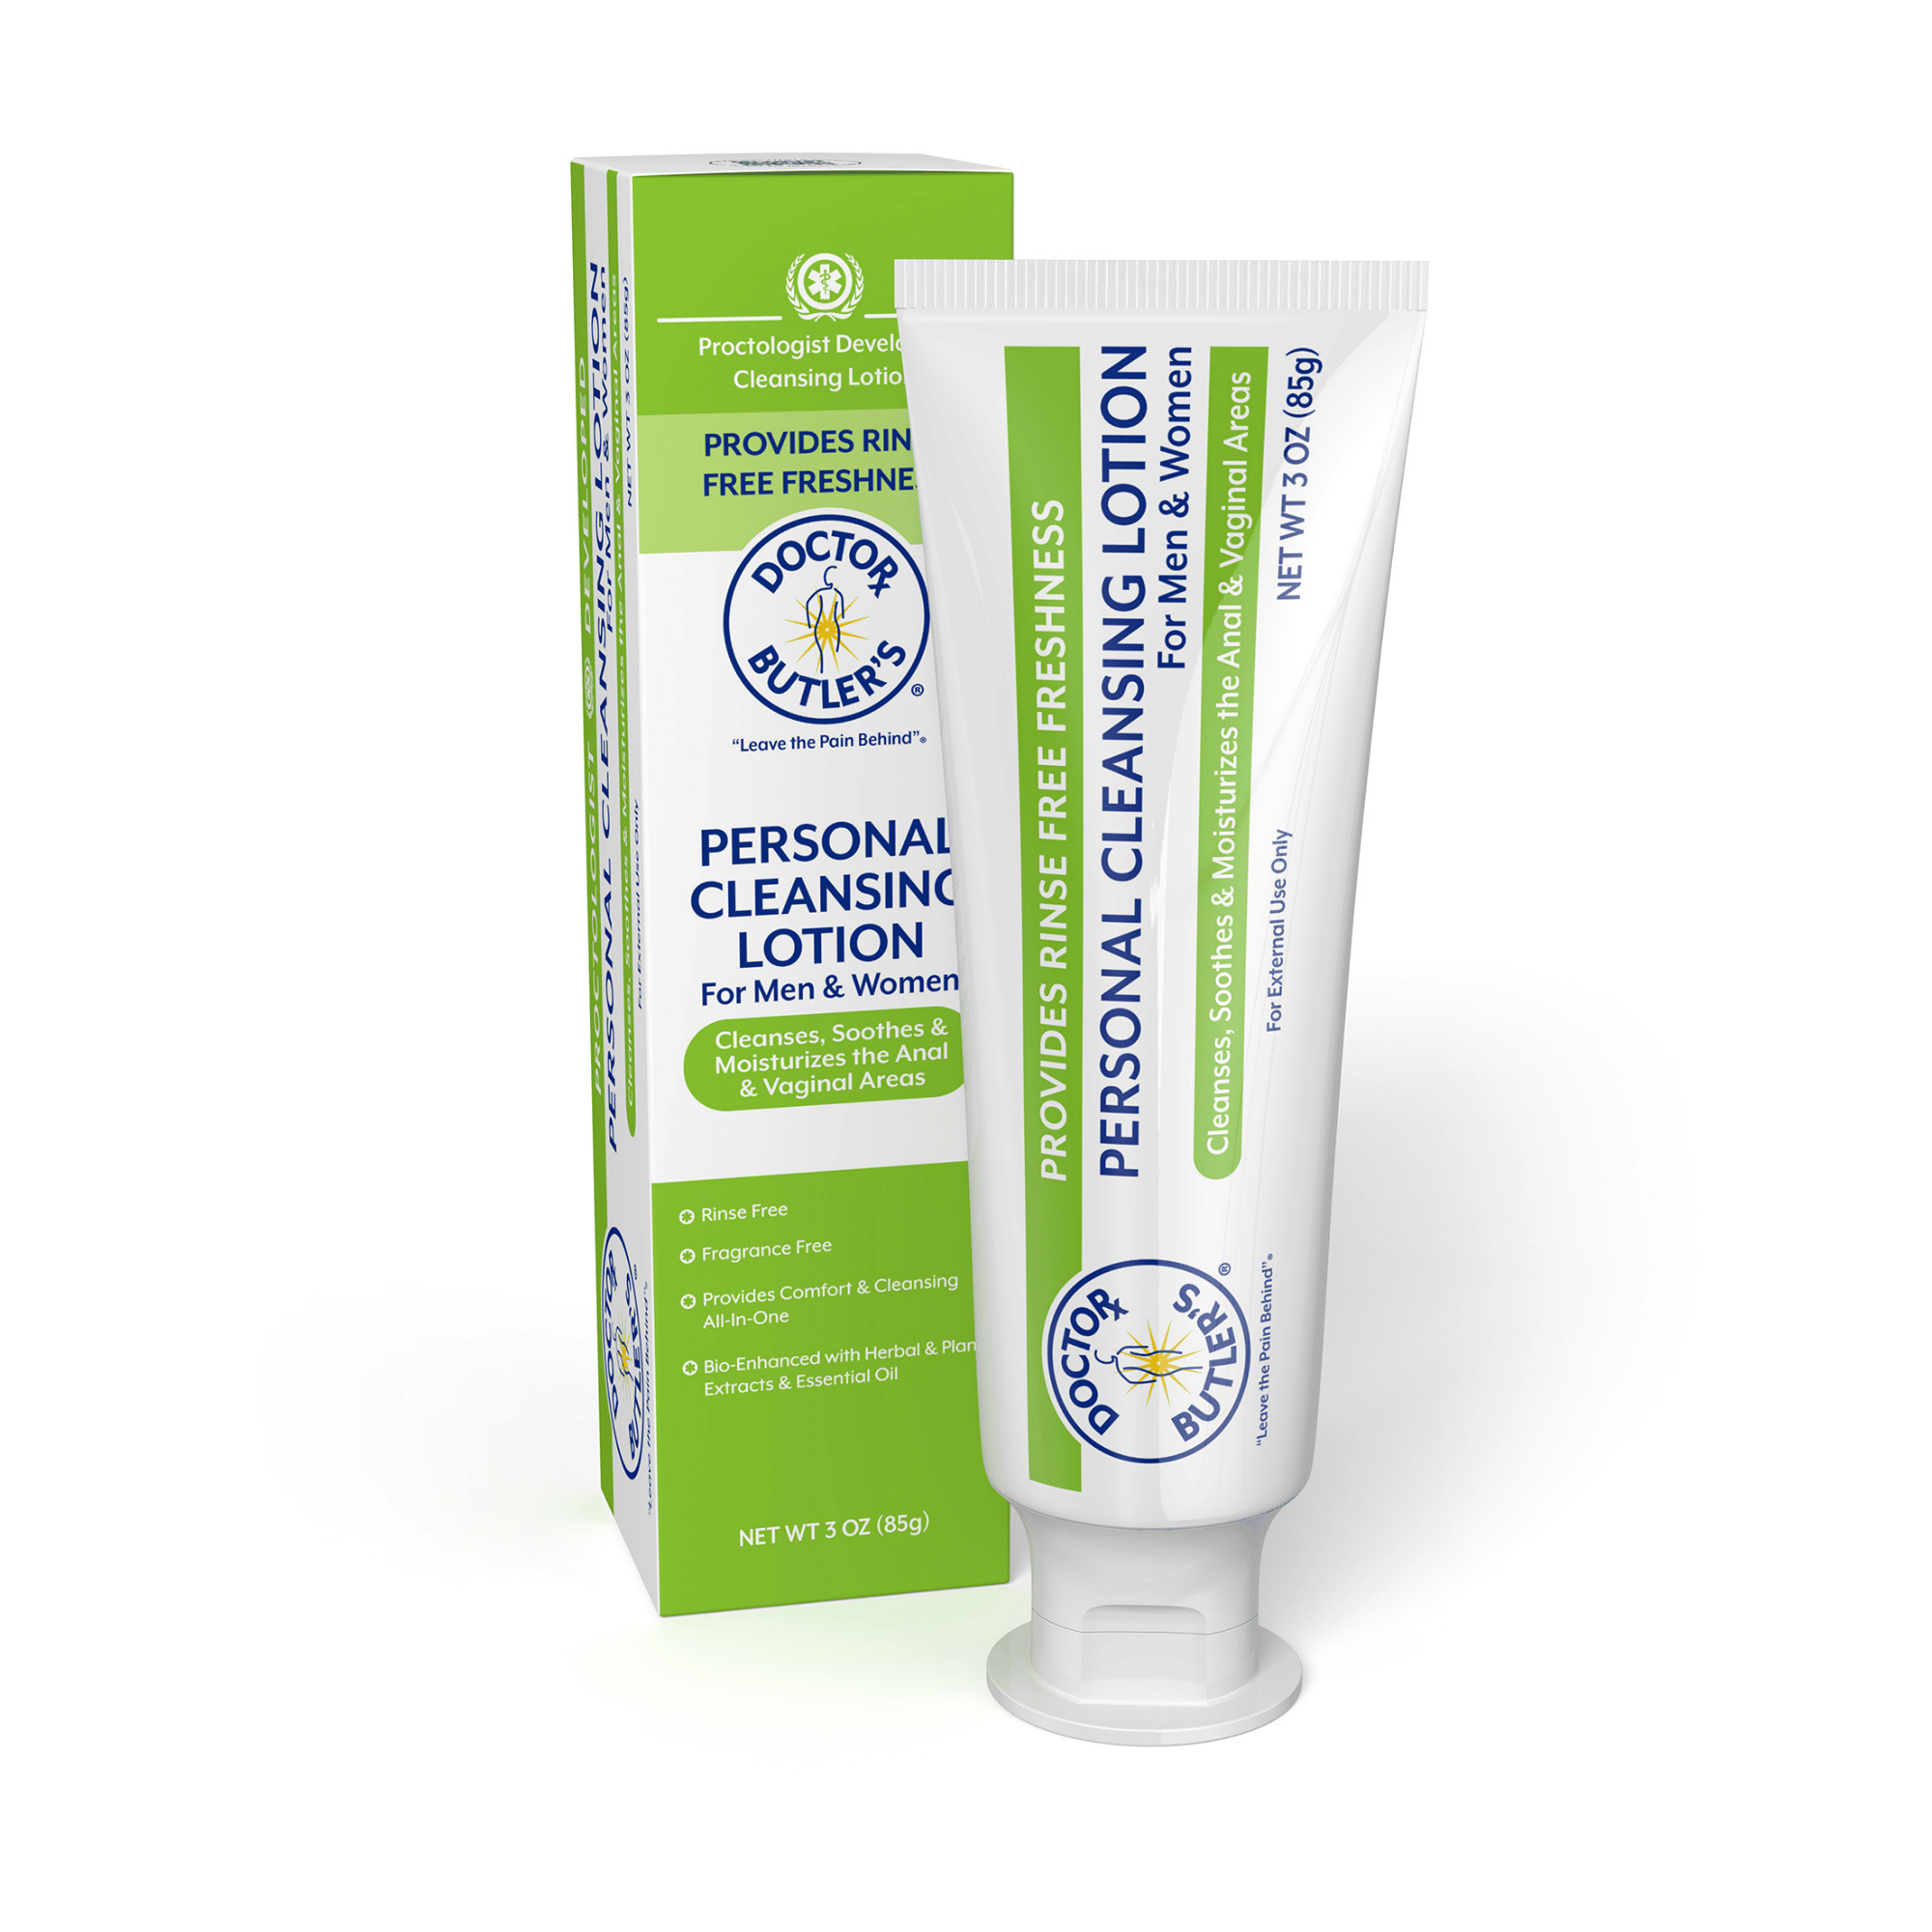 Personal Cleansing Lotion